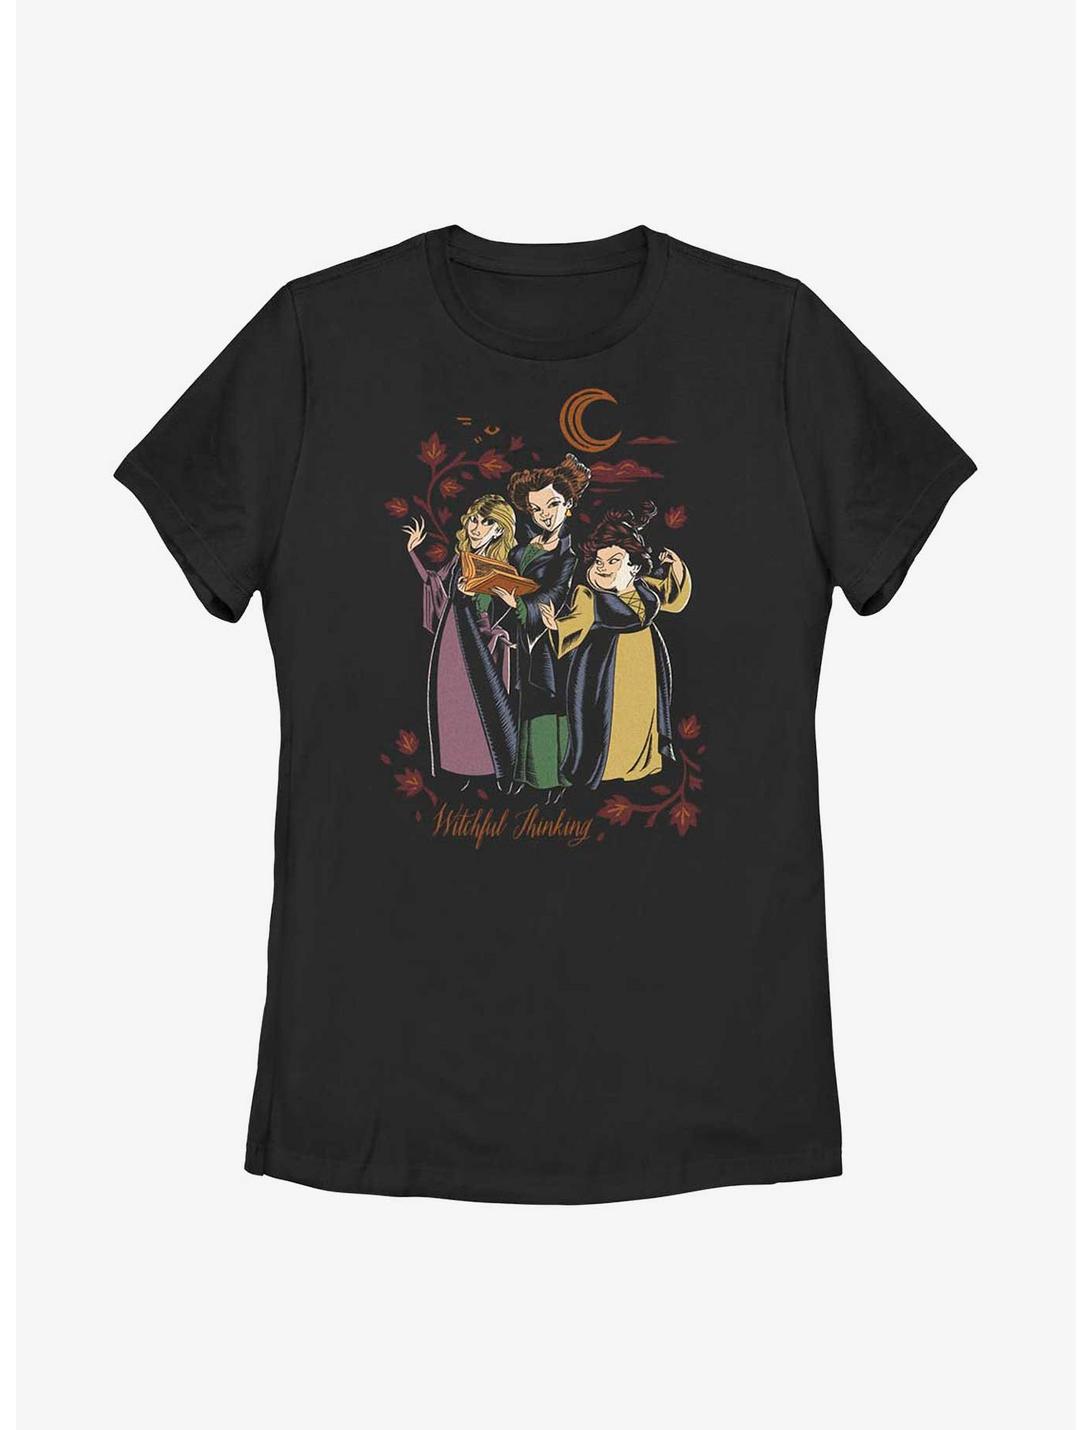 Disney Hocus Pocus 2 Witchful Thinking Sisters Womens T-Shirt, BLACK, hi-res